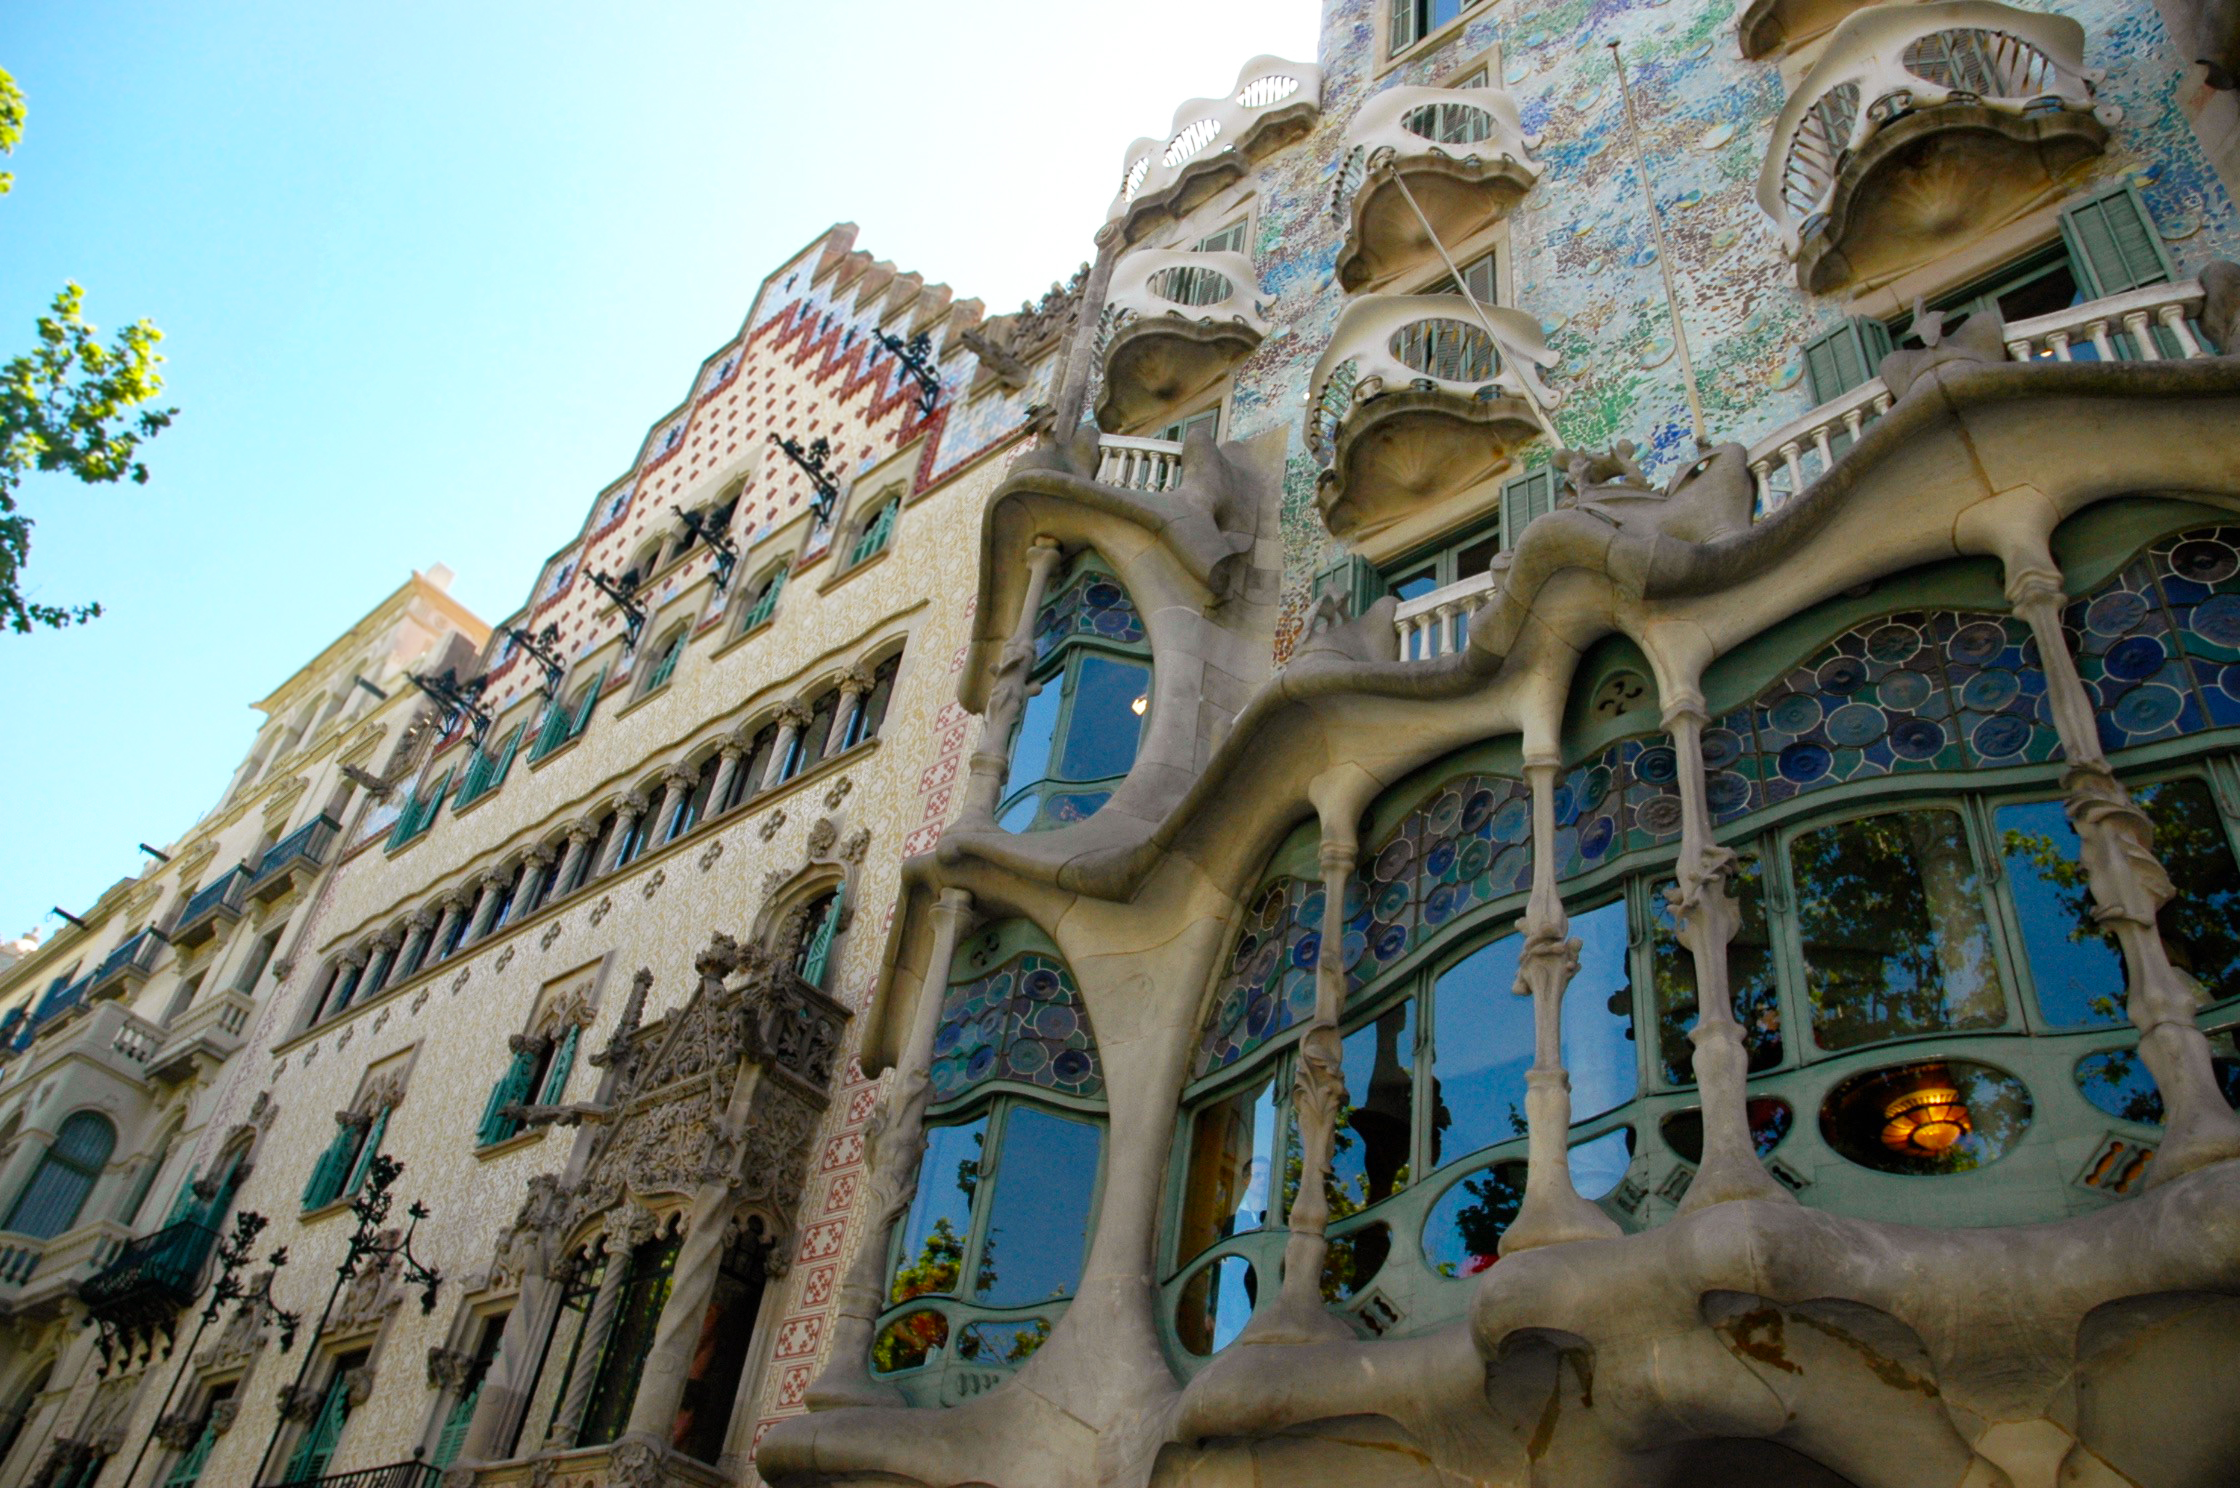 11 Things to Do and See on Your First Trip to Barcelona ⋆ Full Time Explorer